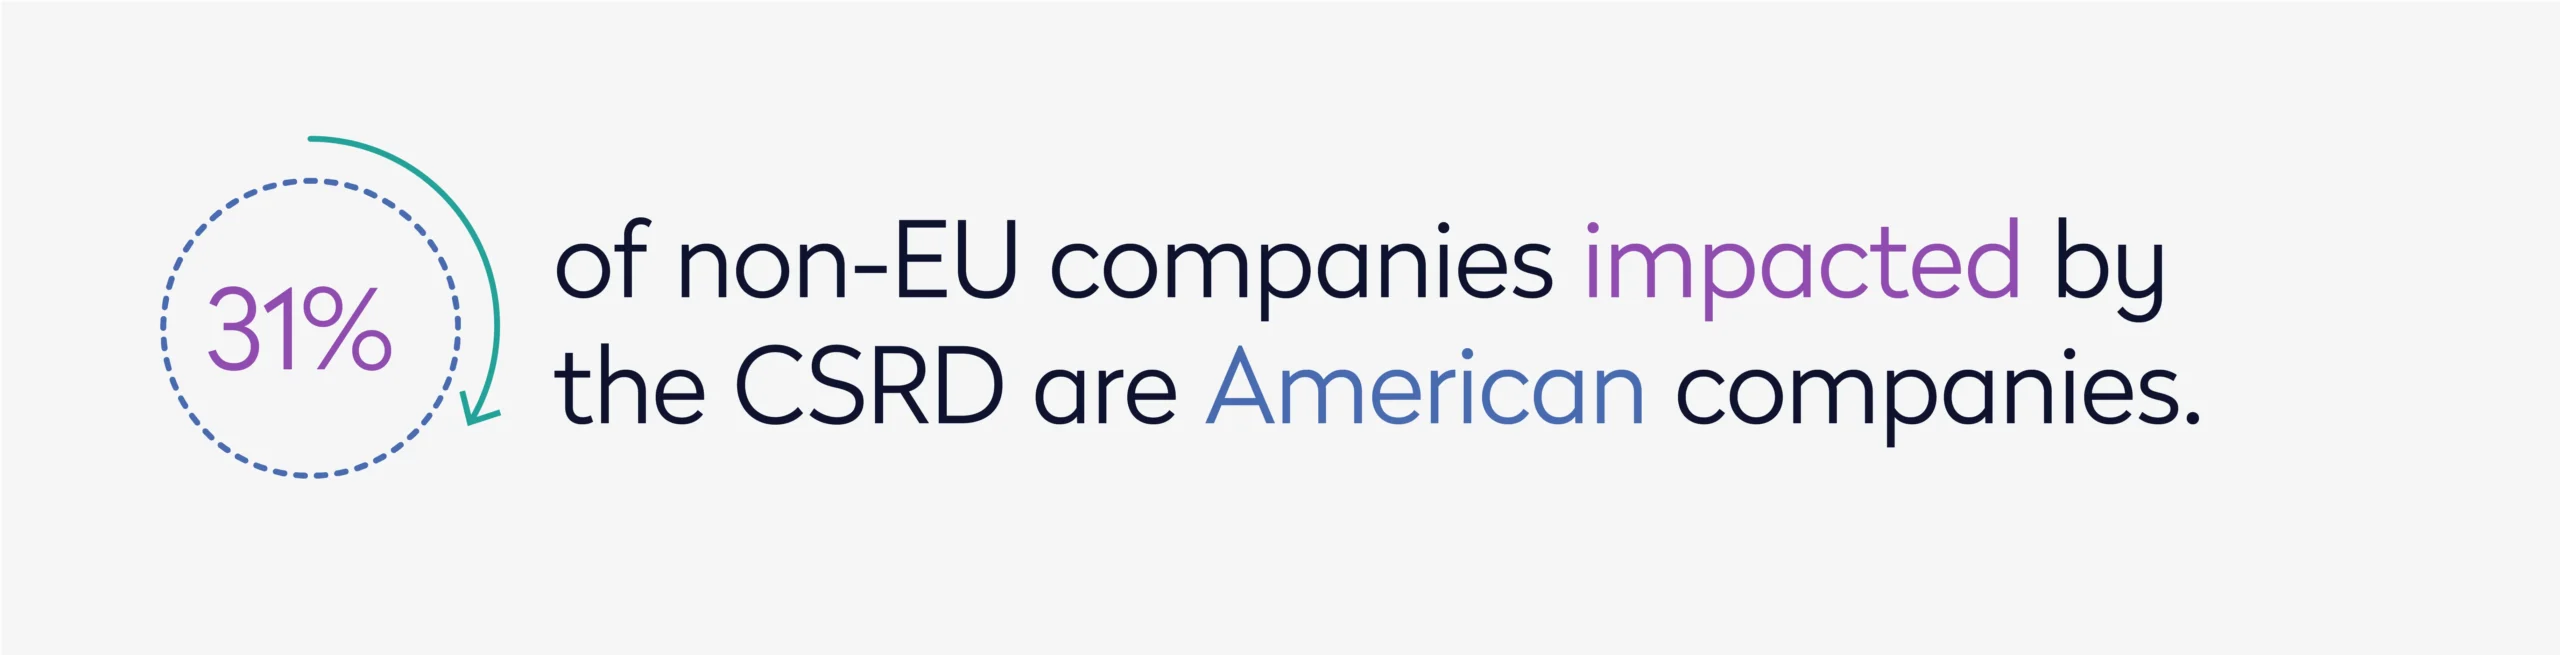 31 percent of non-EU companies impacted by the CSRD are American companies